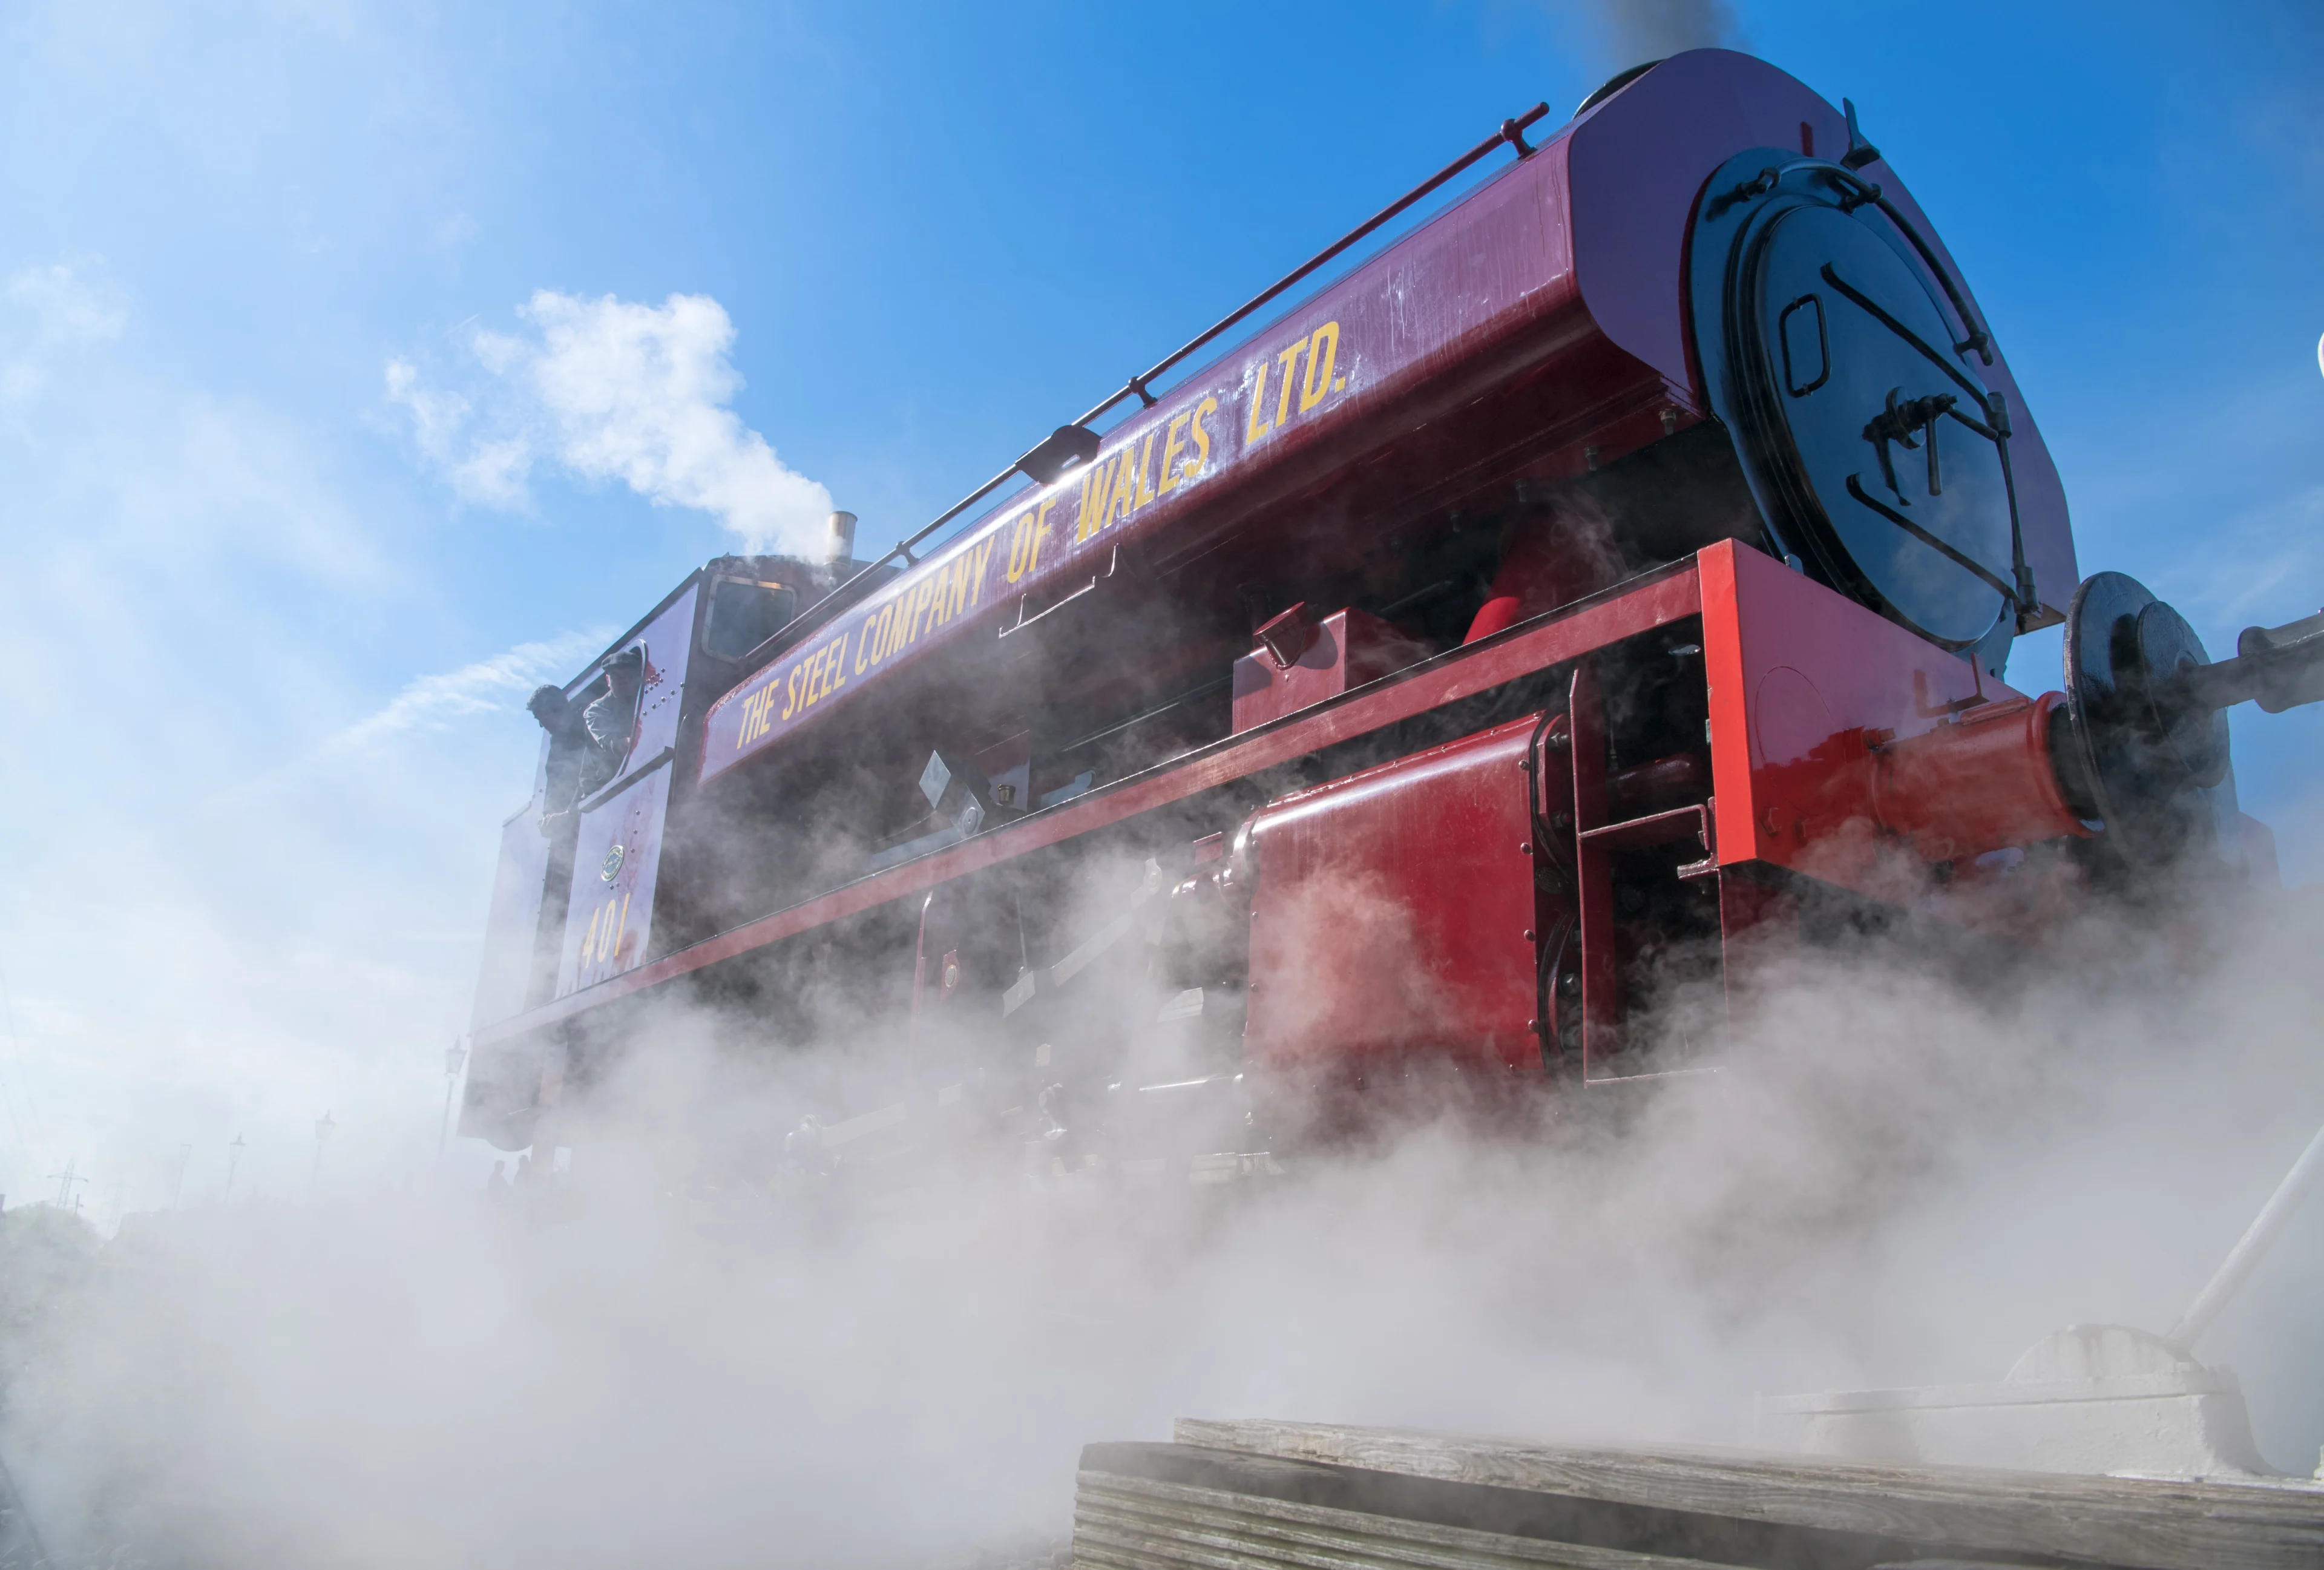 A red steam engine in motion